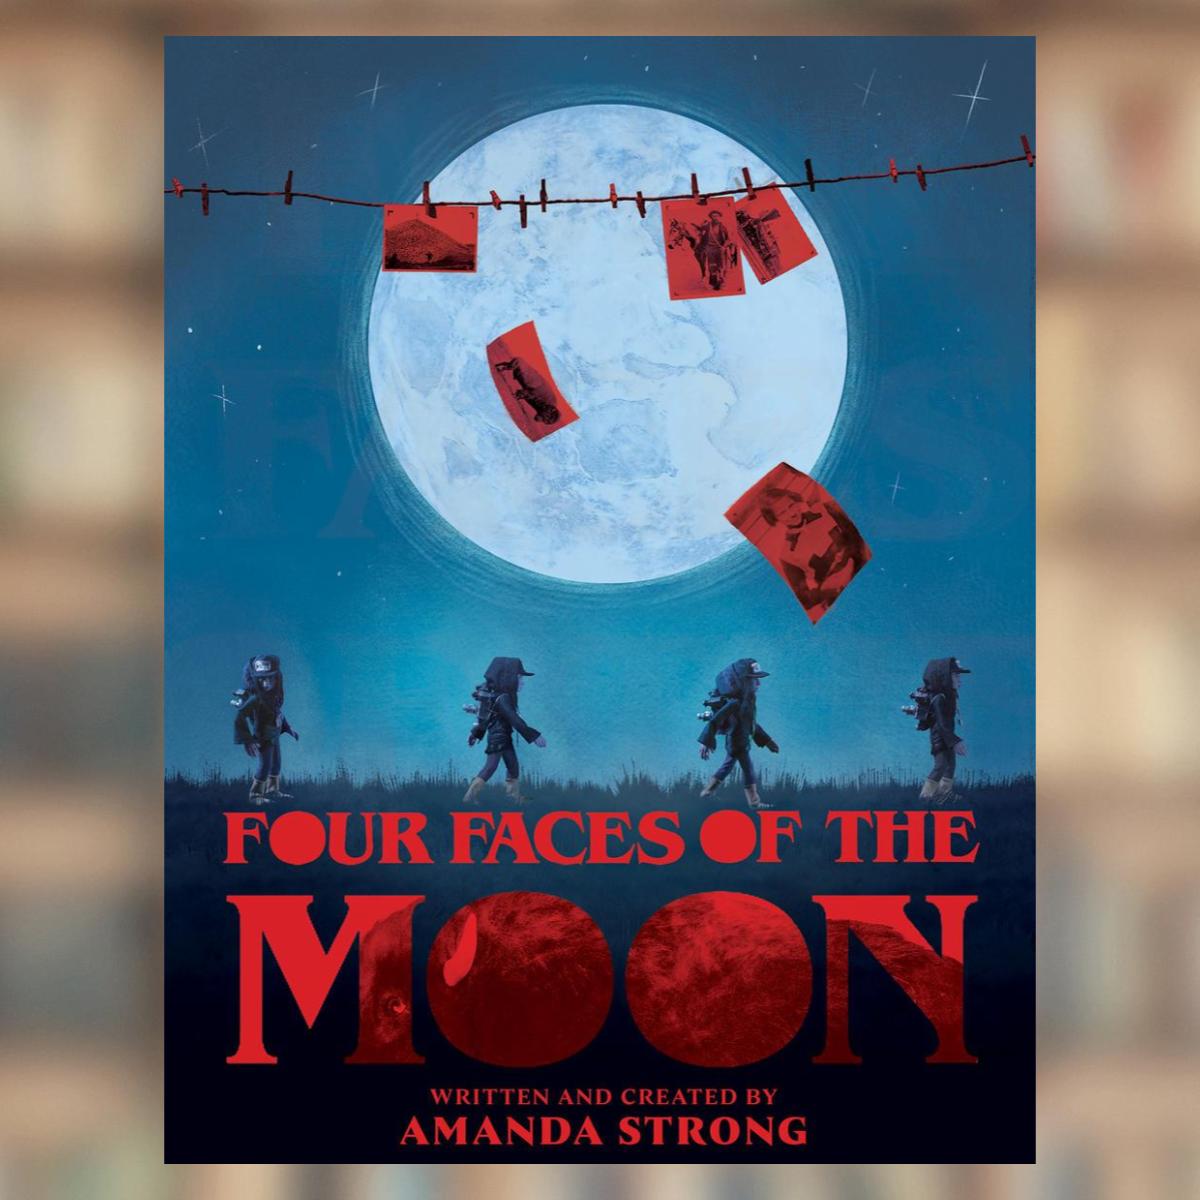 Four Faces of the Moon by Amanda Strong has been longlisted for the First Nation Communities Read Awards 2022. 💫 Free Shipping & Discounts are included for FNCR 2022 (Children-YA-Adult) category bundles. @GoodMindsBooks - Read more: goodminds.com/collections/fn…